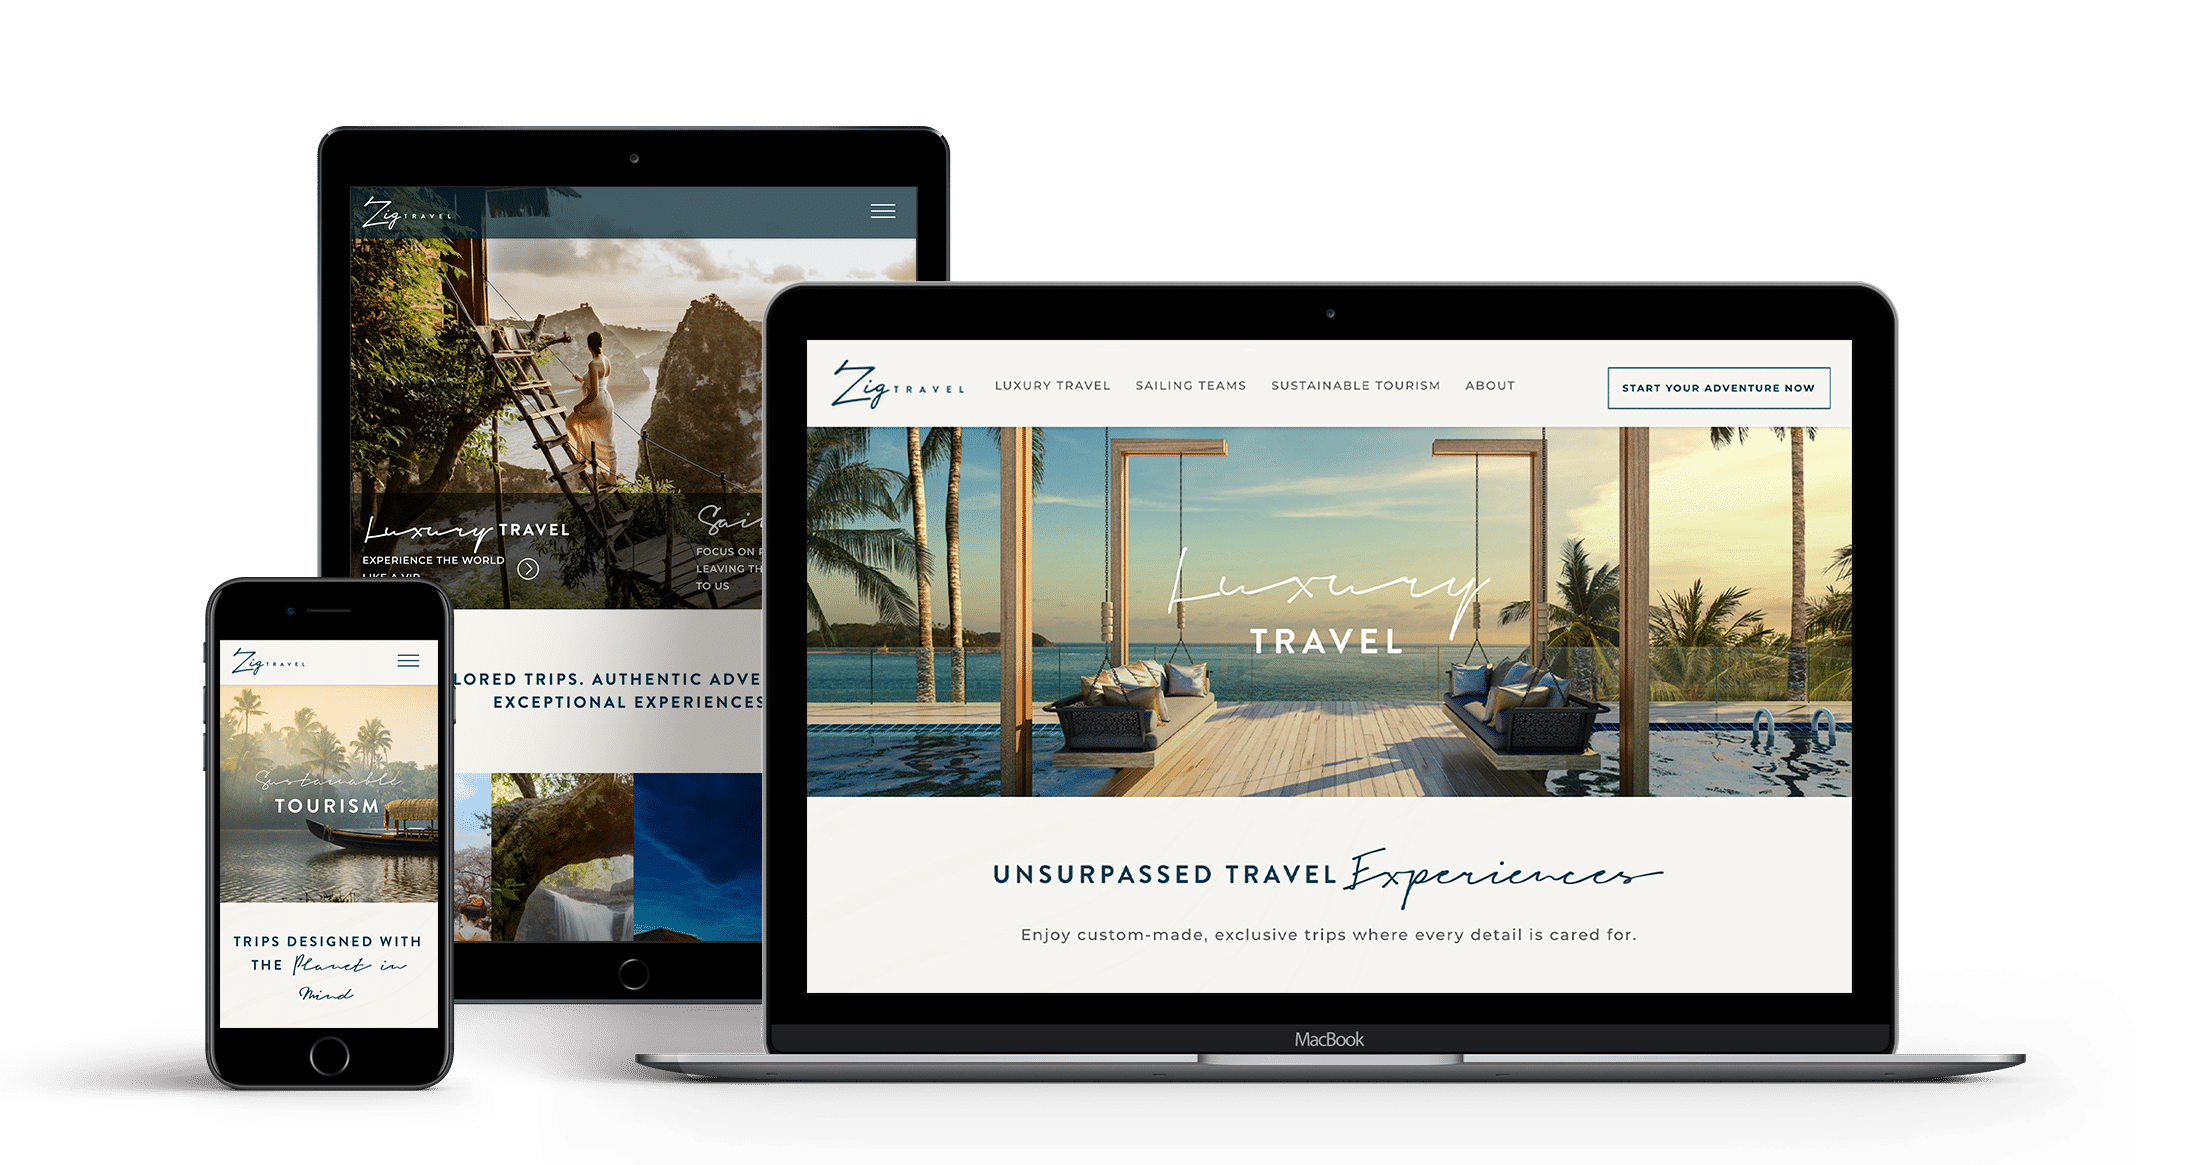 Zig Travel new luxury travel website design featuring desirable waterfront destinations, shown on various devices.